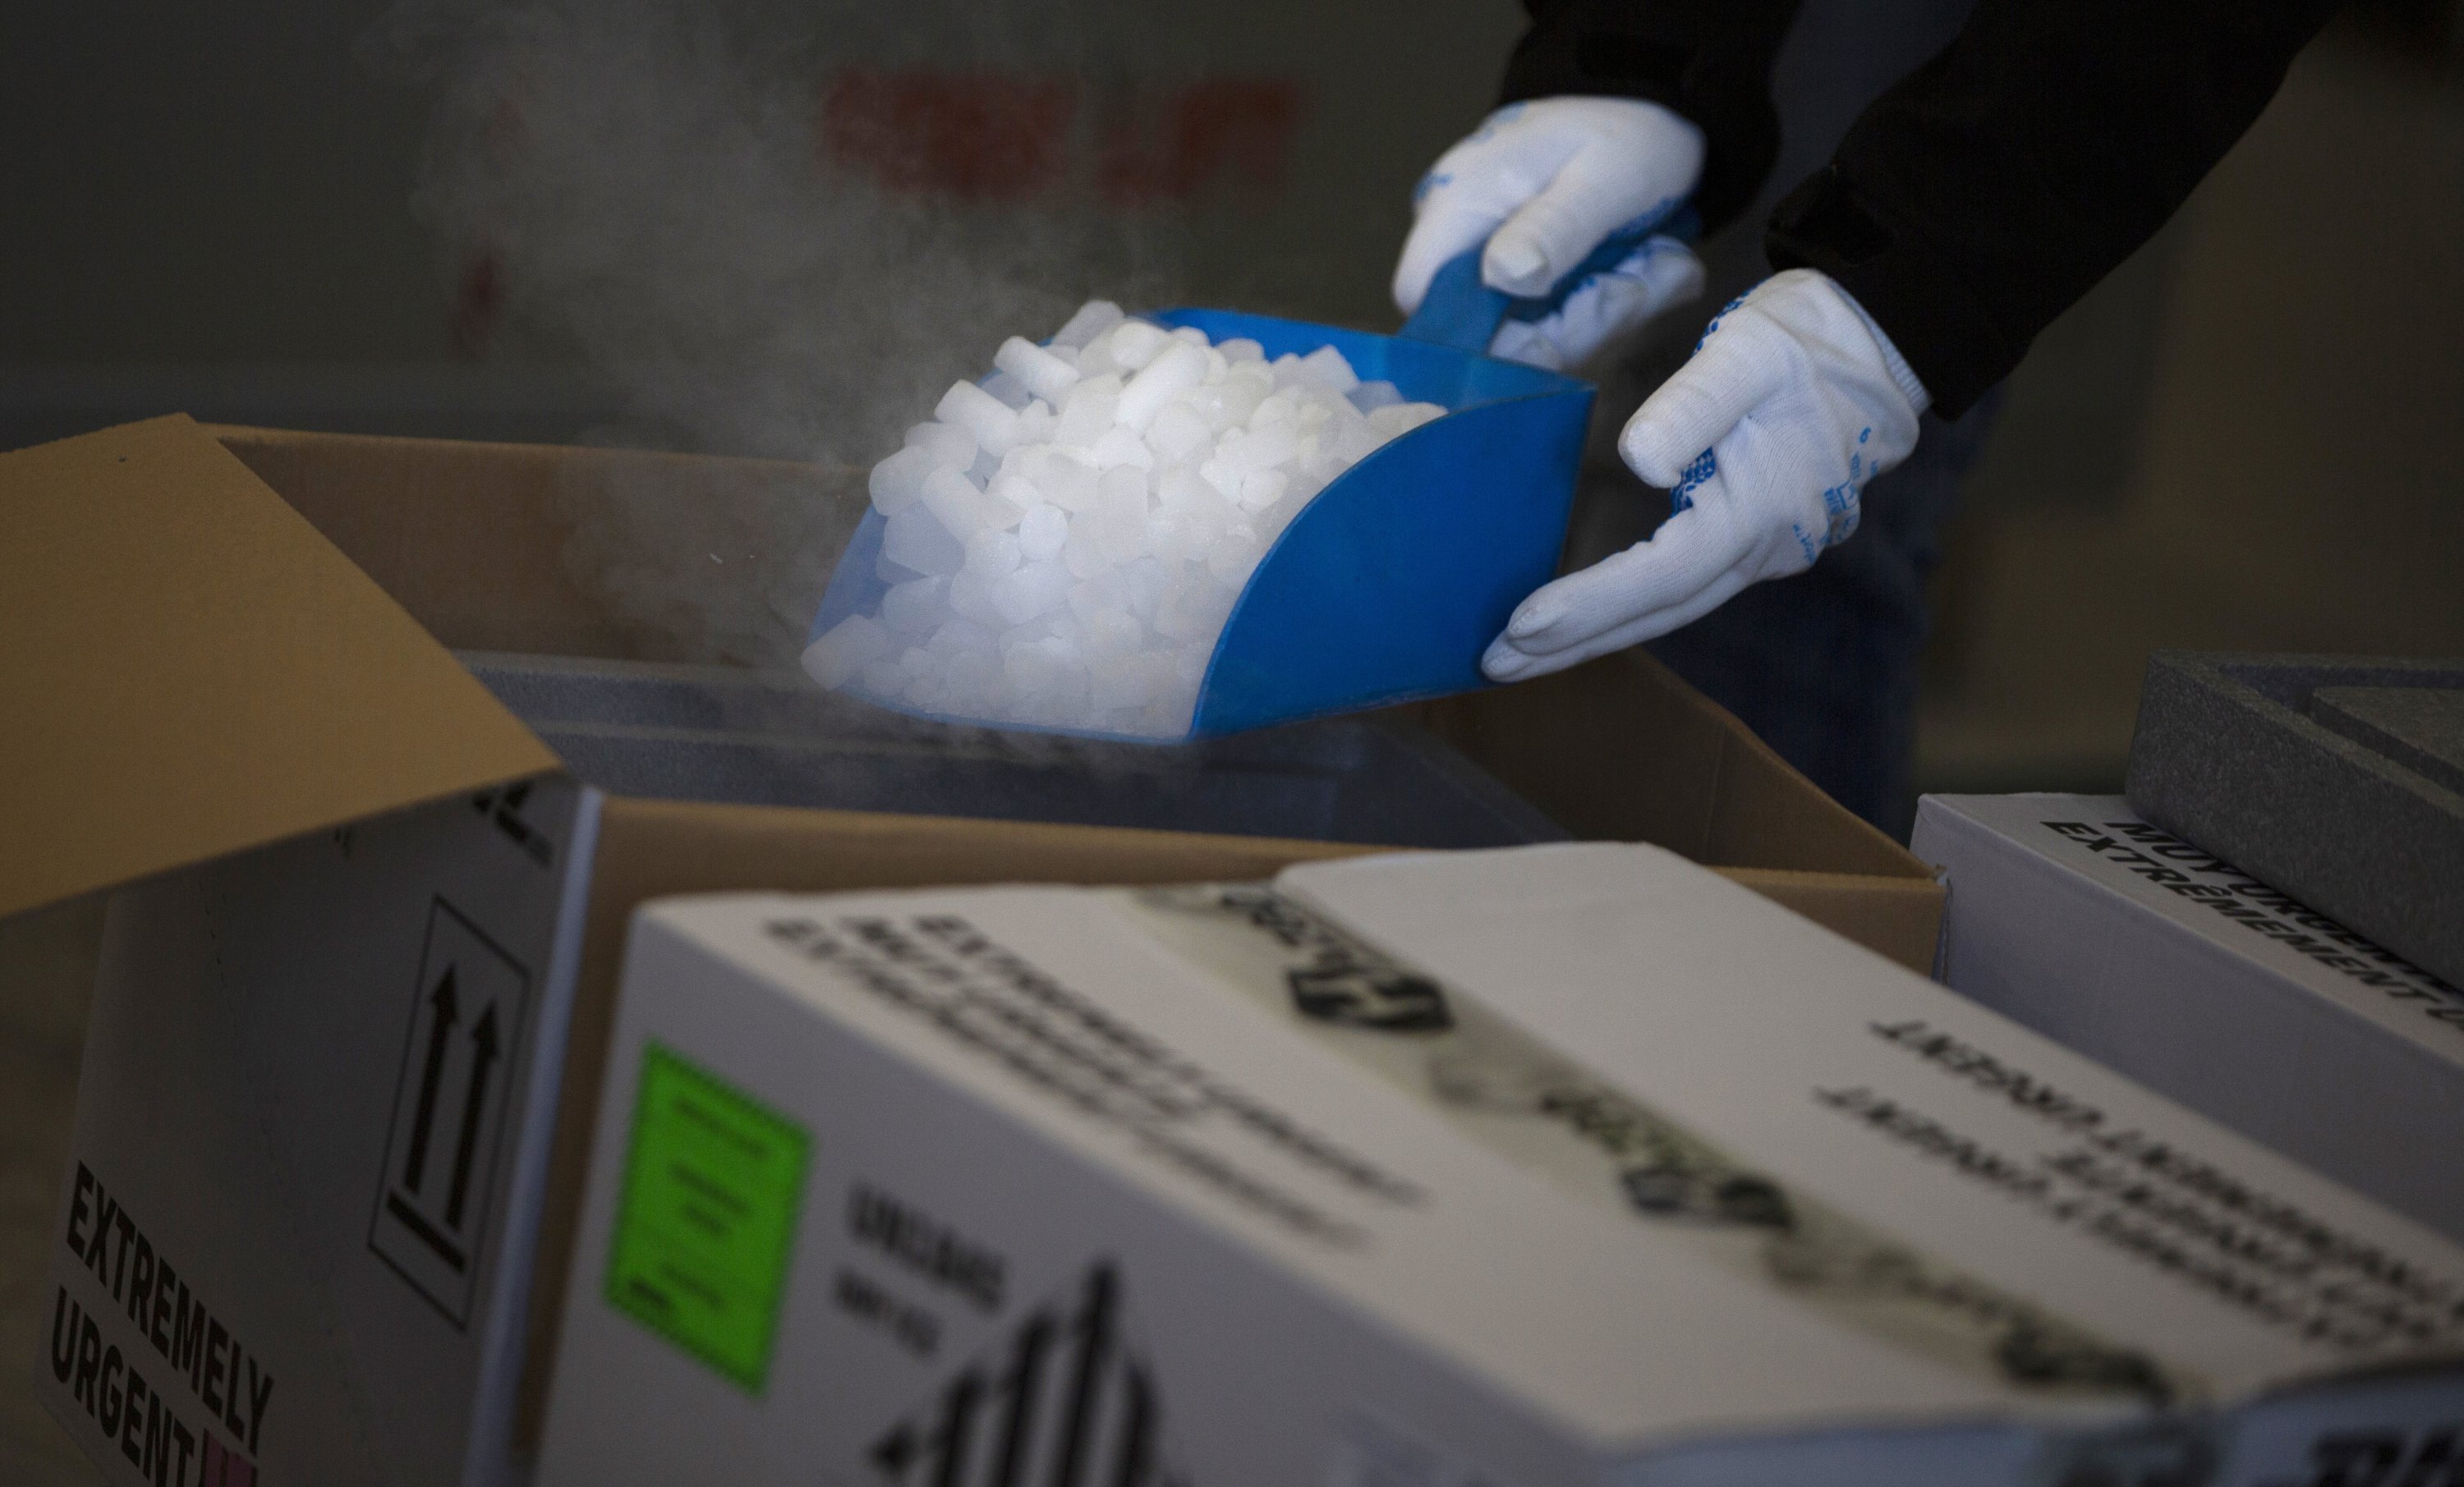 A worker shows how dry ice is used on specific vaccines and medicines to keep them cool during a demonstration at a cargo warehouse in Steenokkerzeel, Belgium, Dec. 1, 2020. (AP Photo)